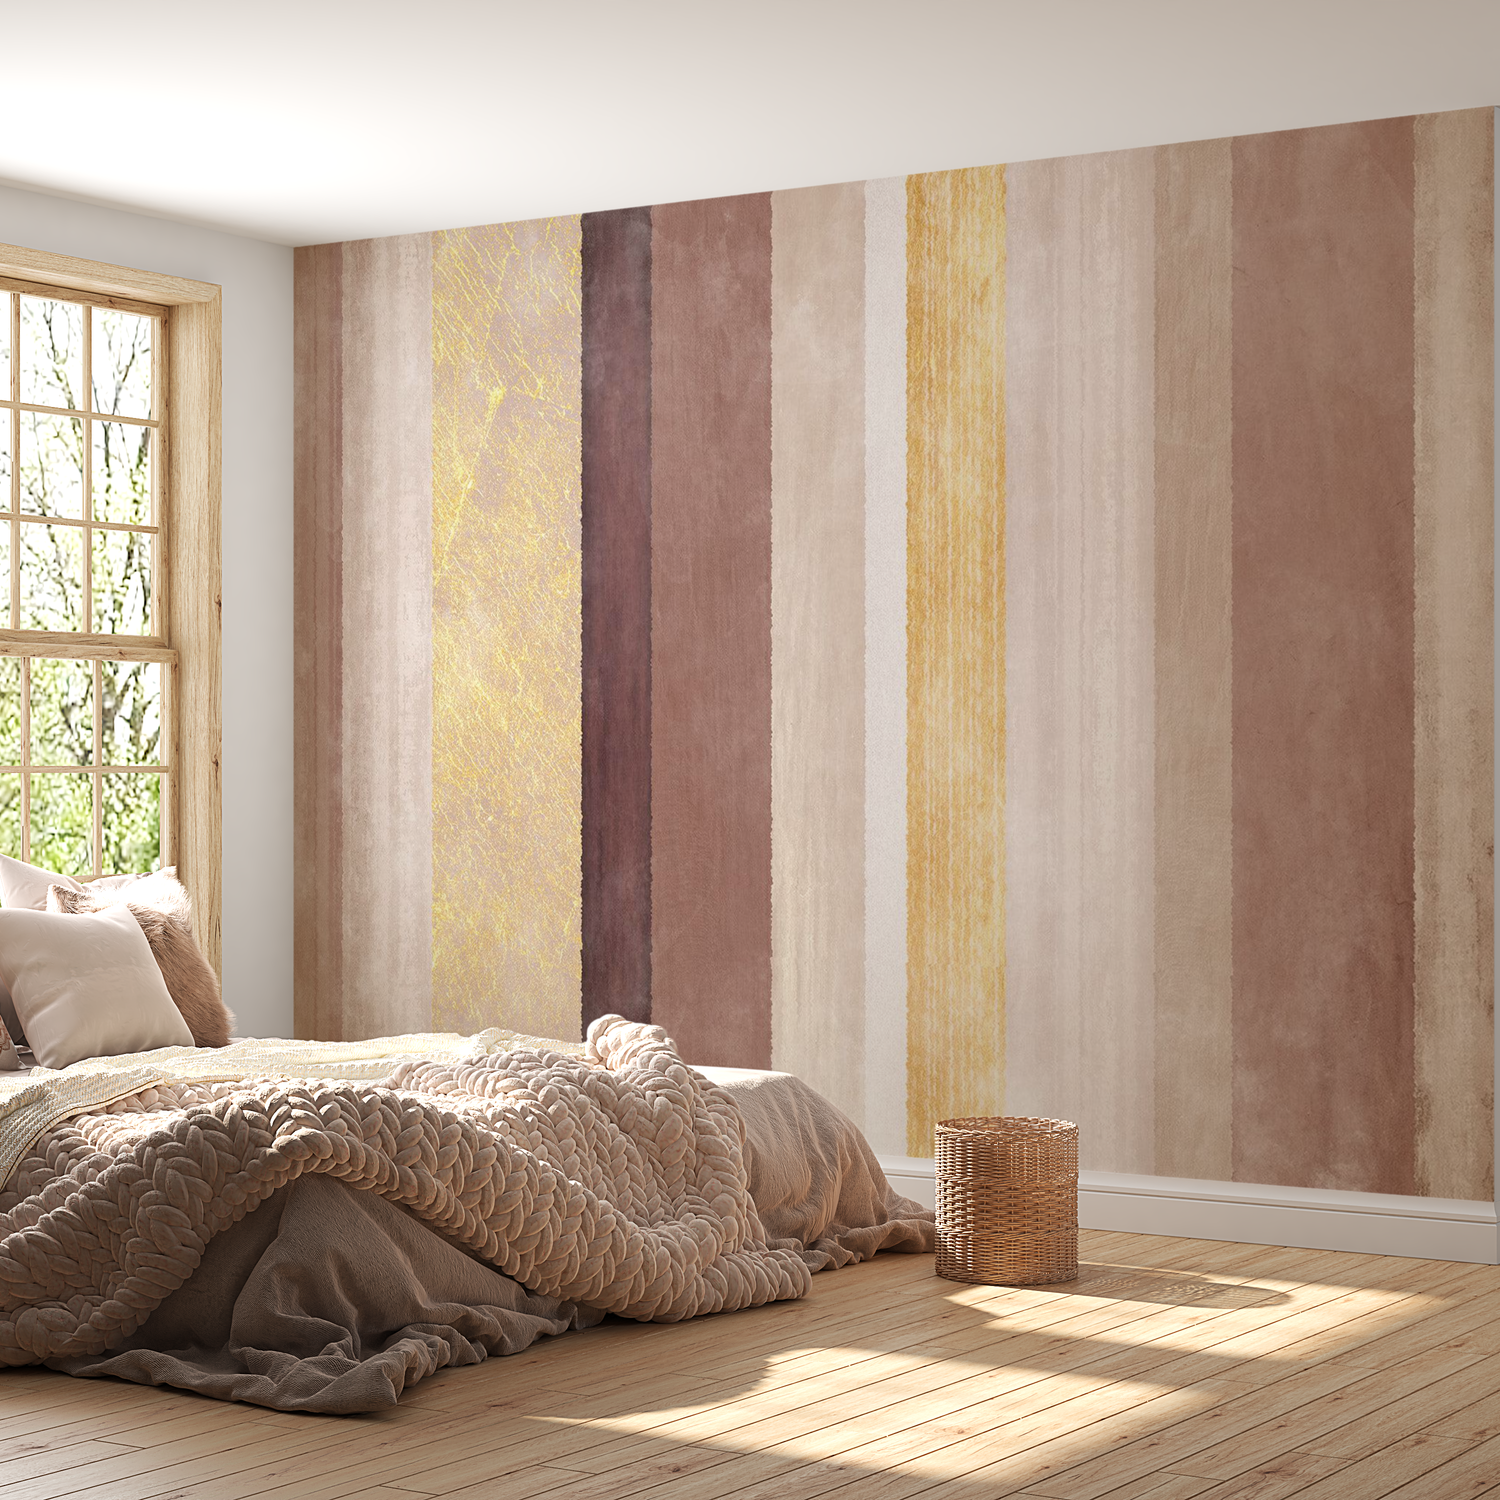 Peel & Stick Background Wall Mural - Warm Striped Pattern - Removable Wallpaper 38"Wx27"H